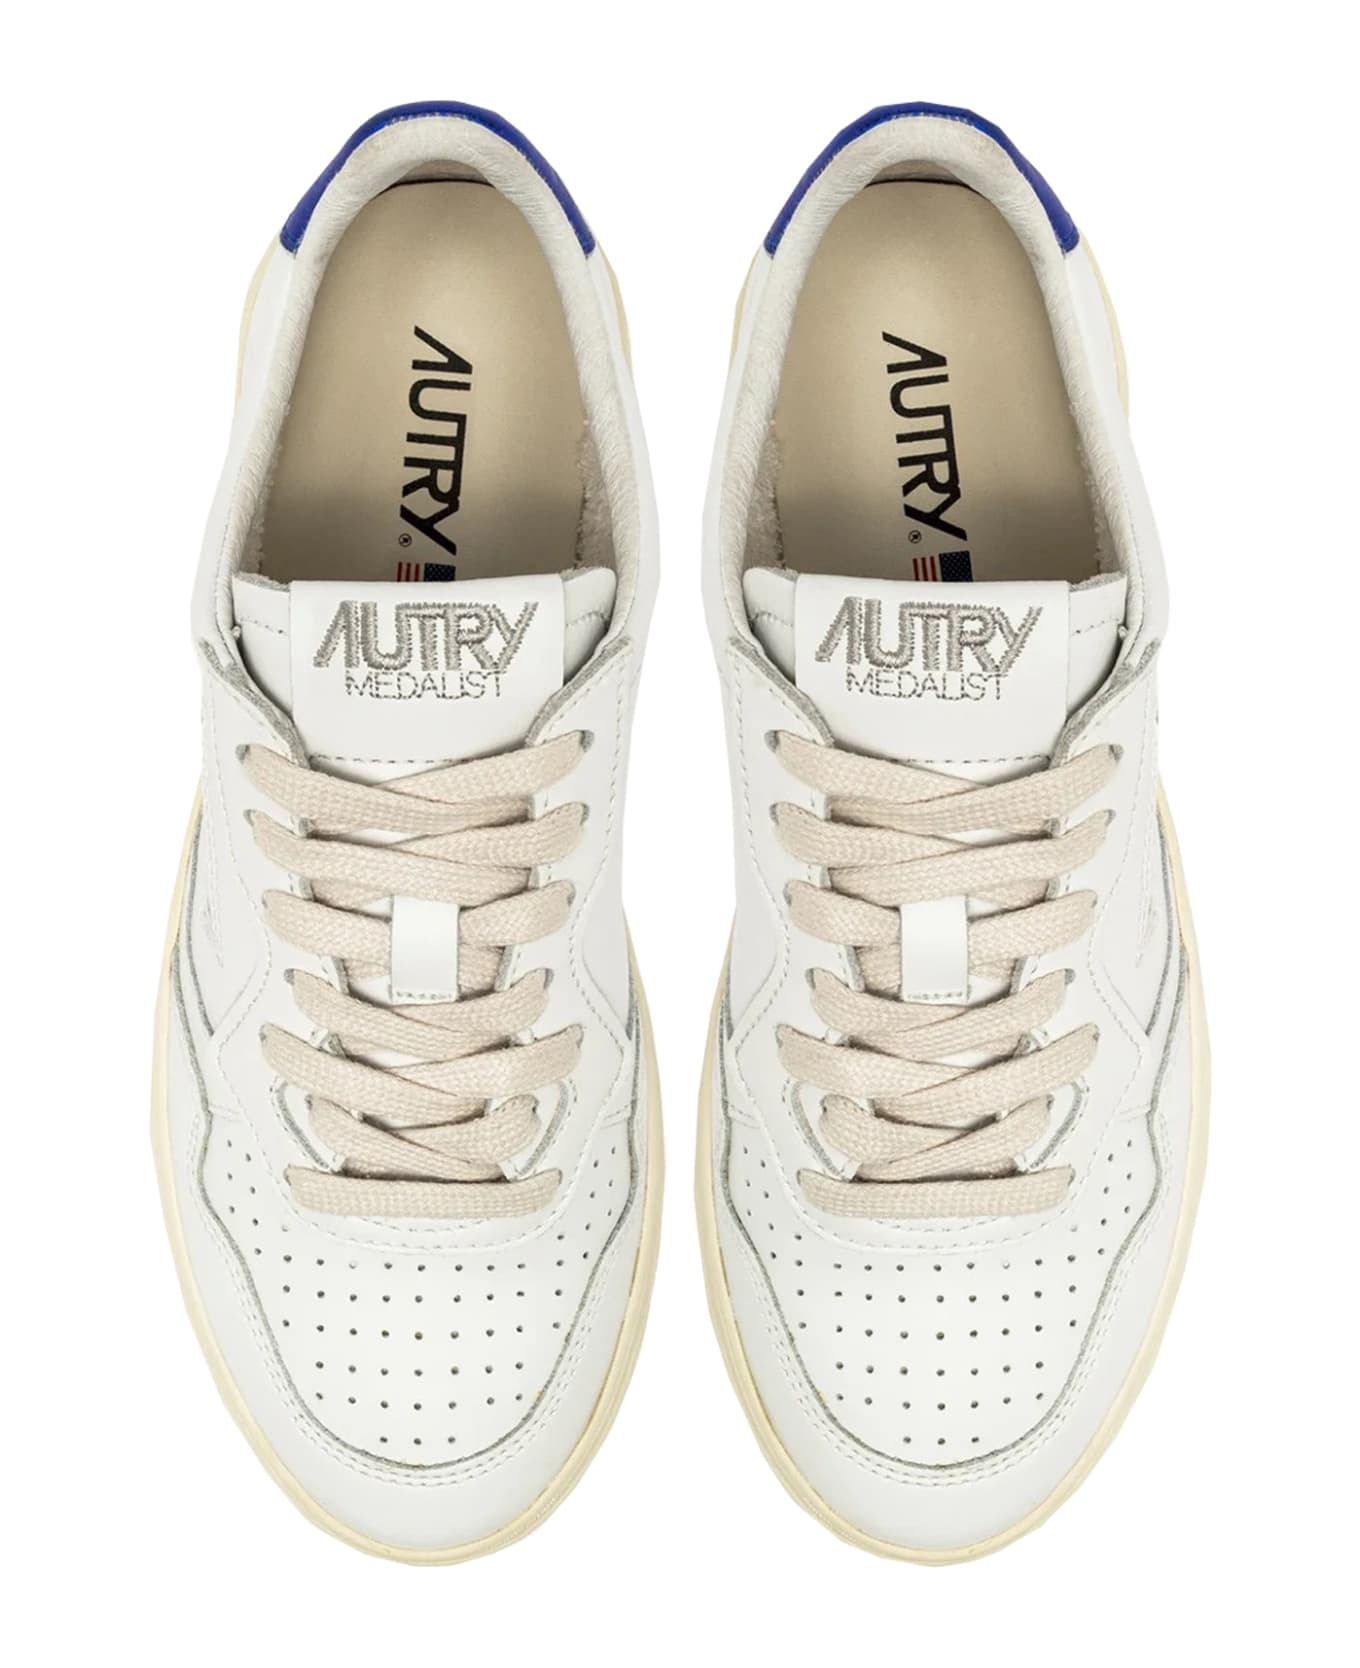 Autry Sneakers Medalist Low - Blue